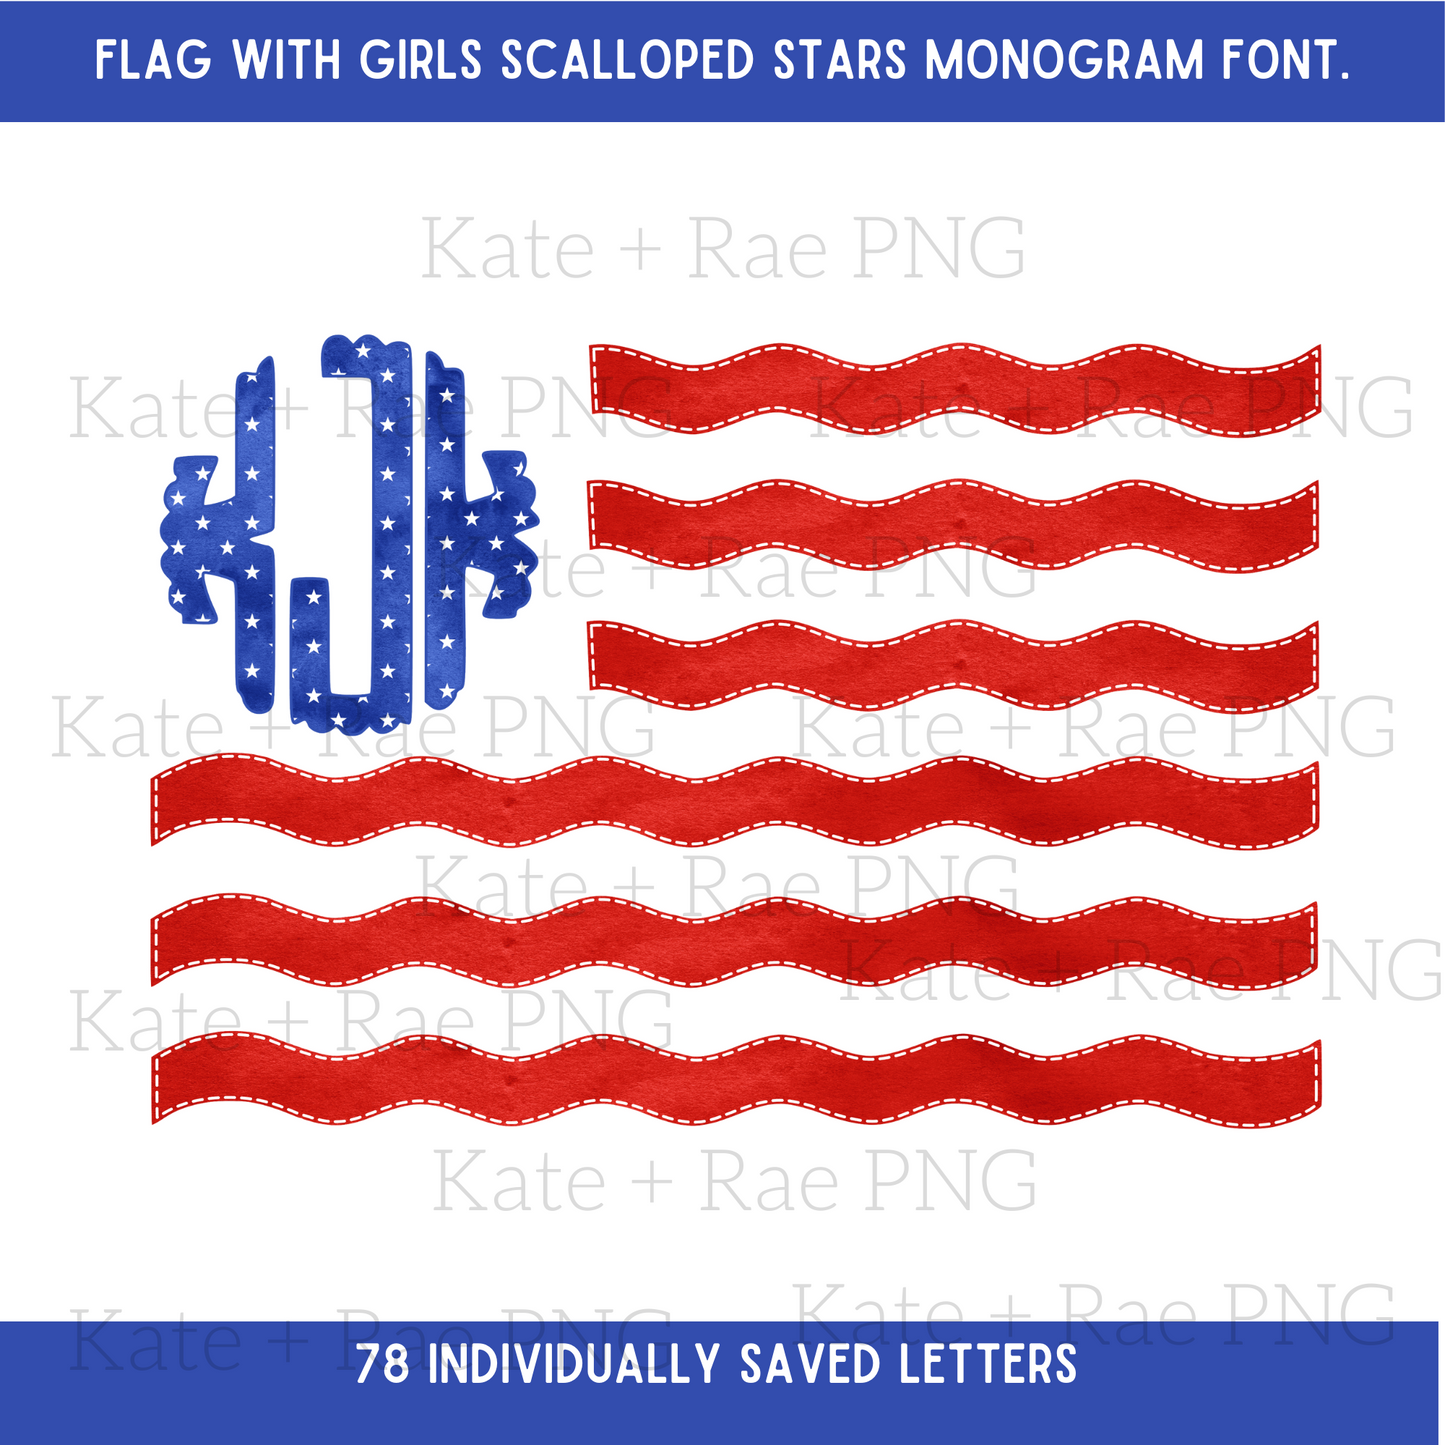 American flag faux applique with girls and boys monogram font.